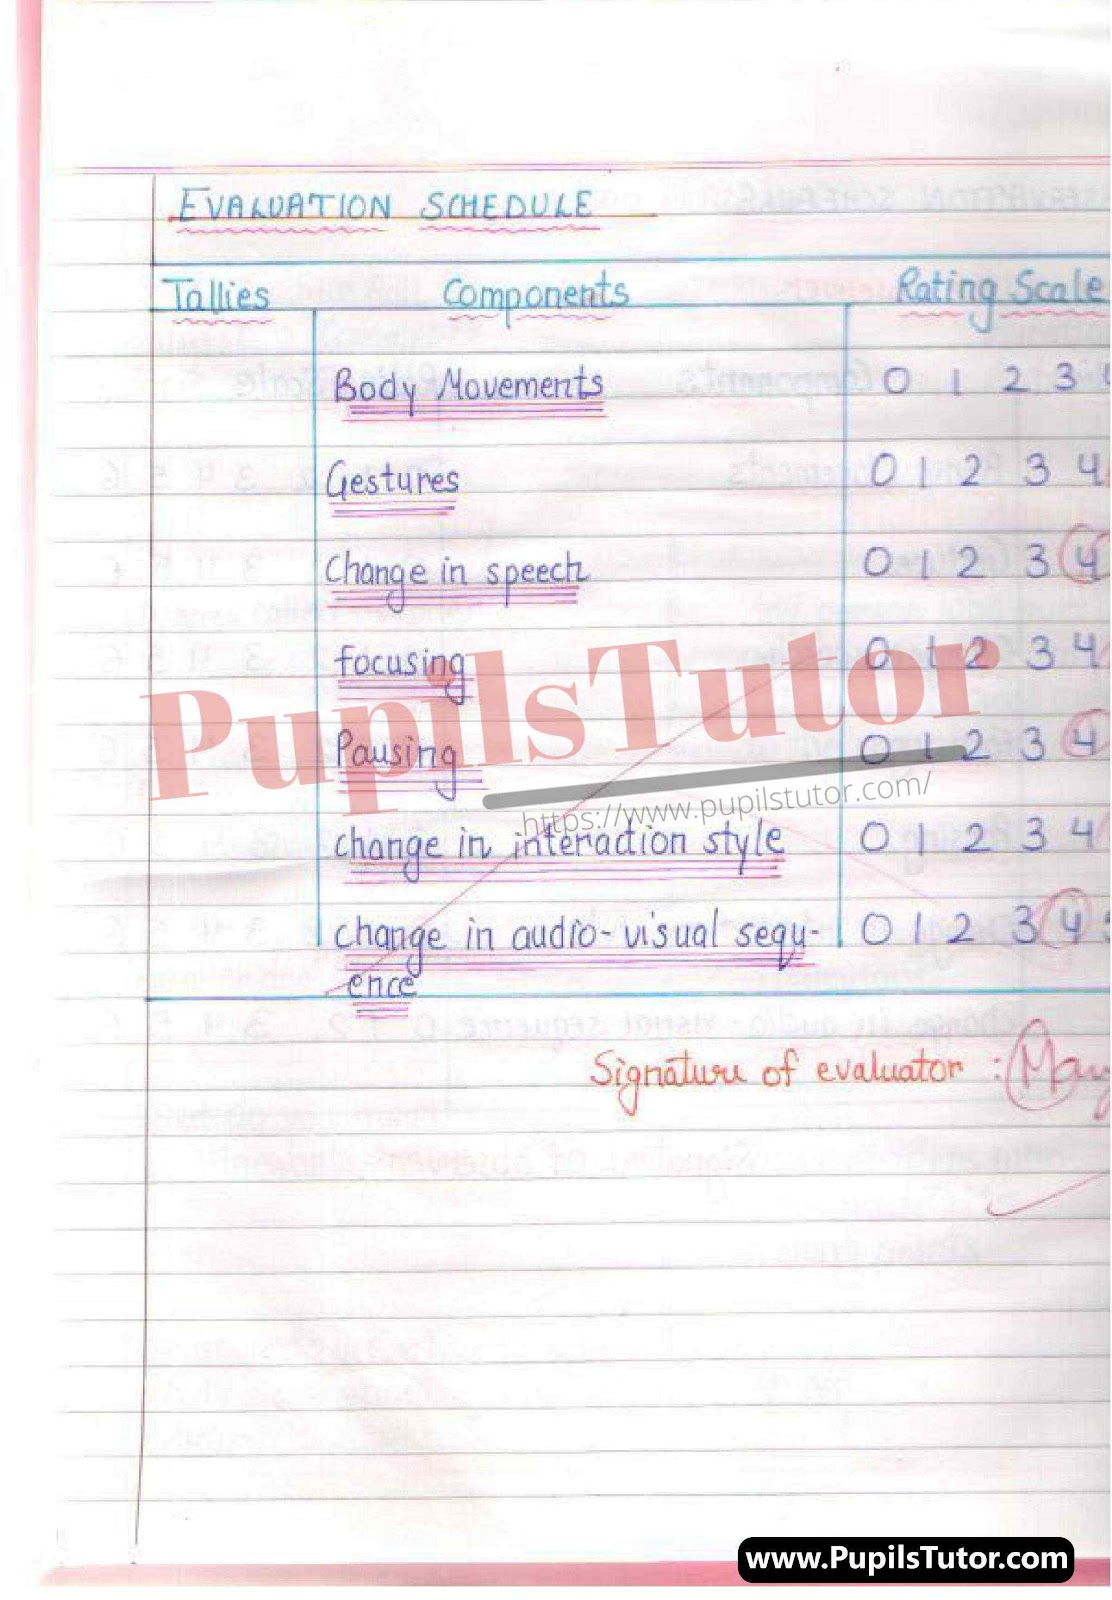 (Commerce) Business Studies Lesson Plan On Retailer For Class/Grade 11 And 12 For CBSE NCERT School And College Teachers  – (Page And Image Number 3) – www.pupilstutor.com